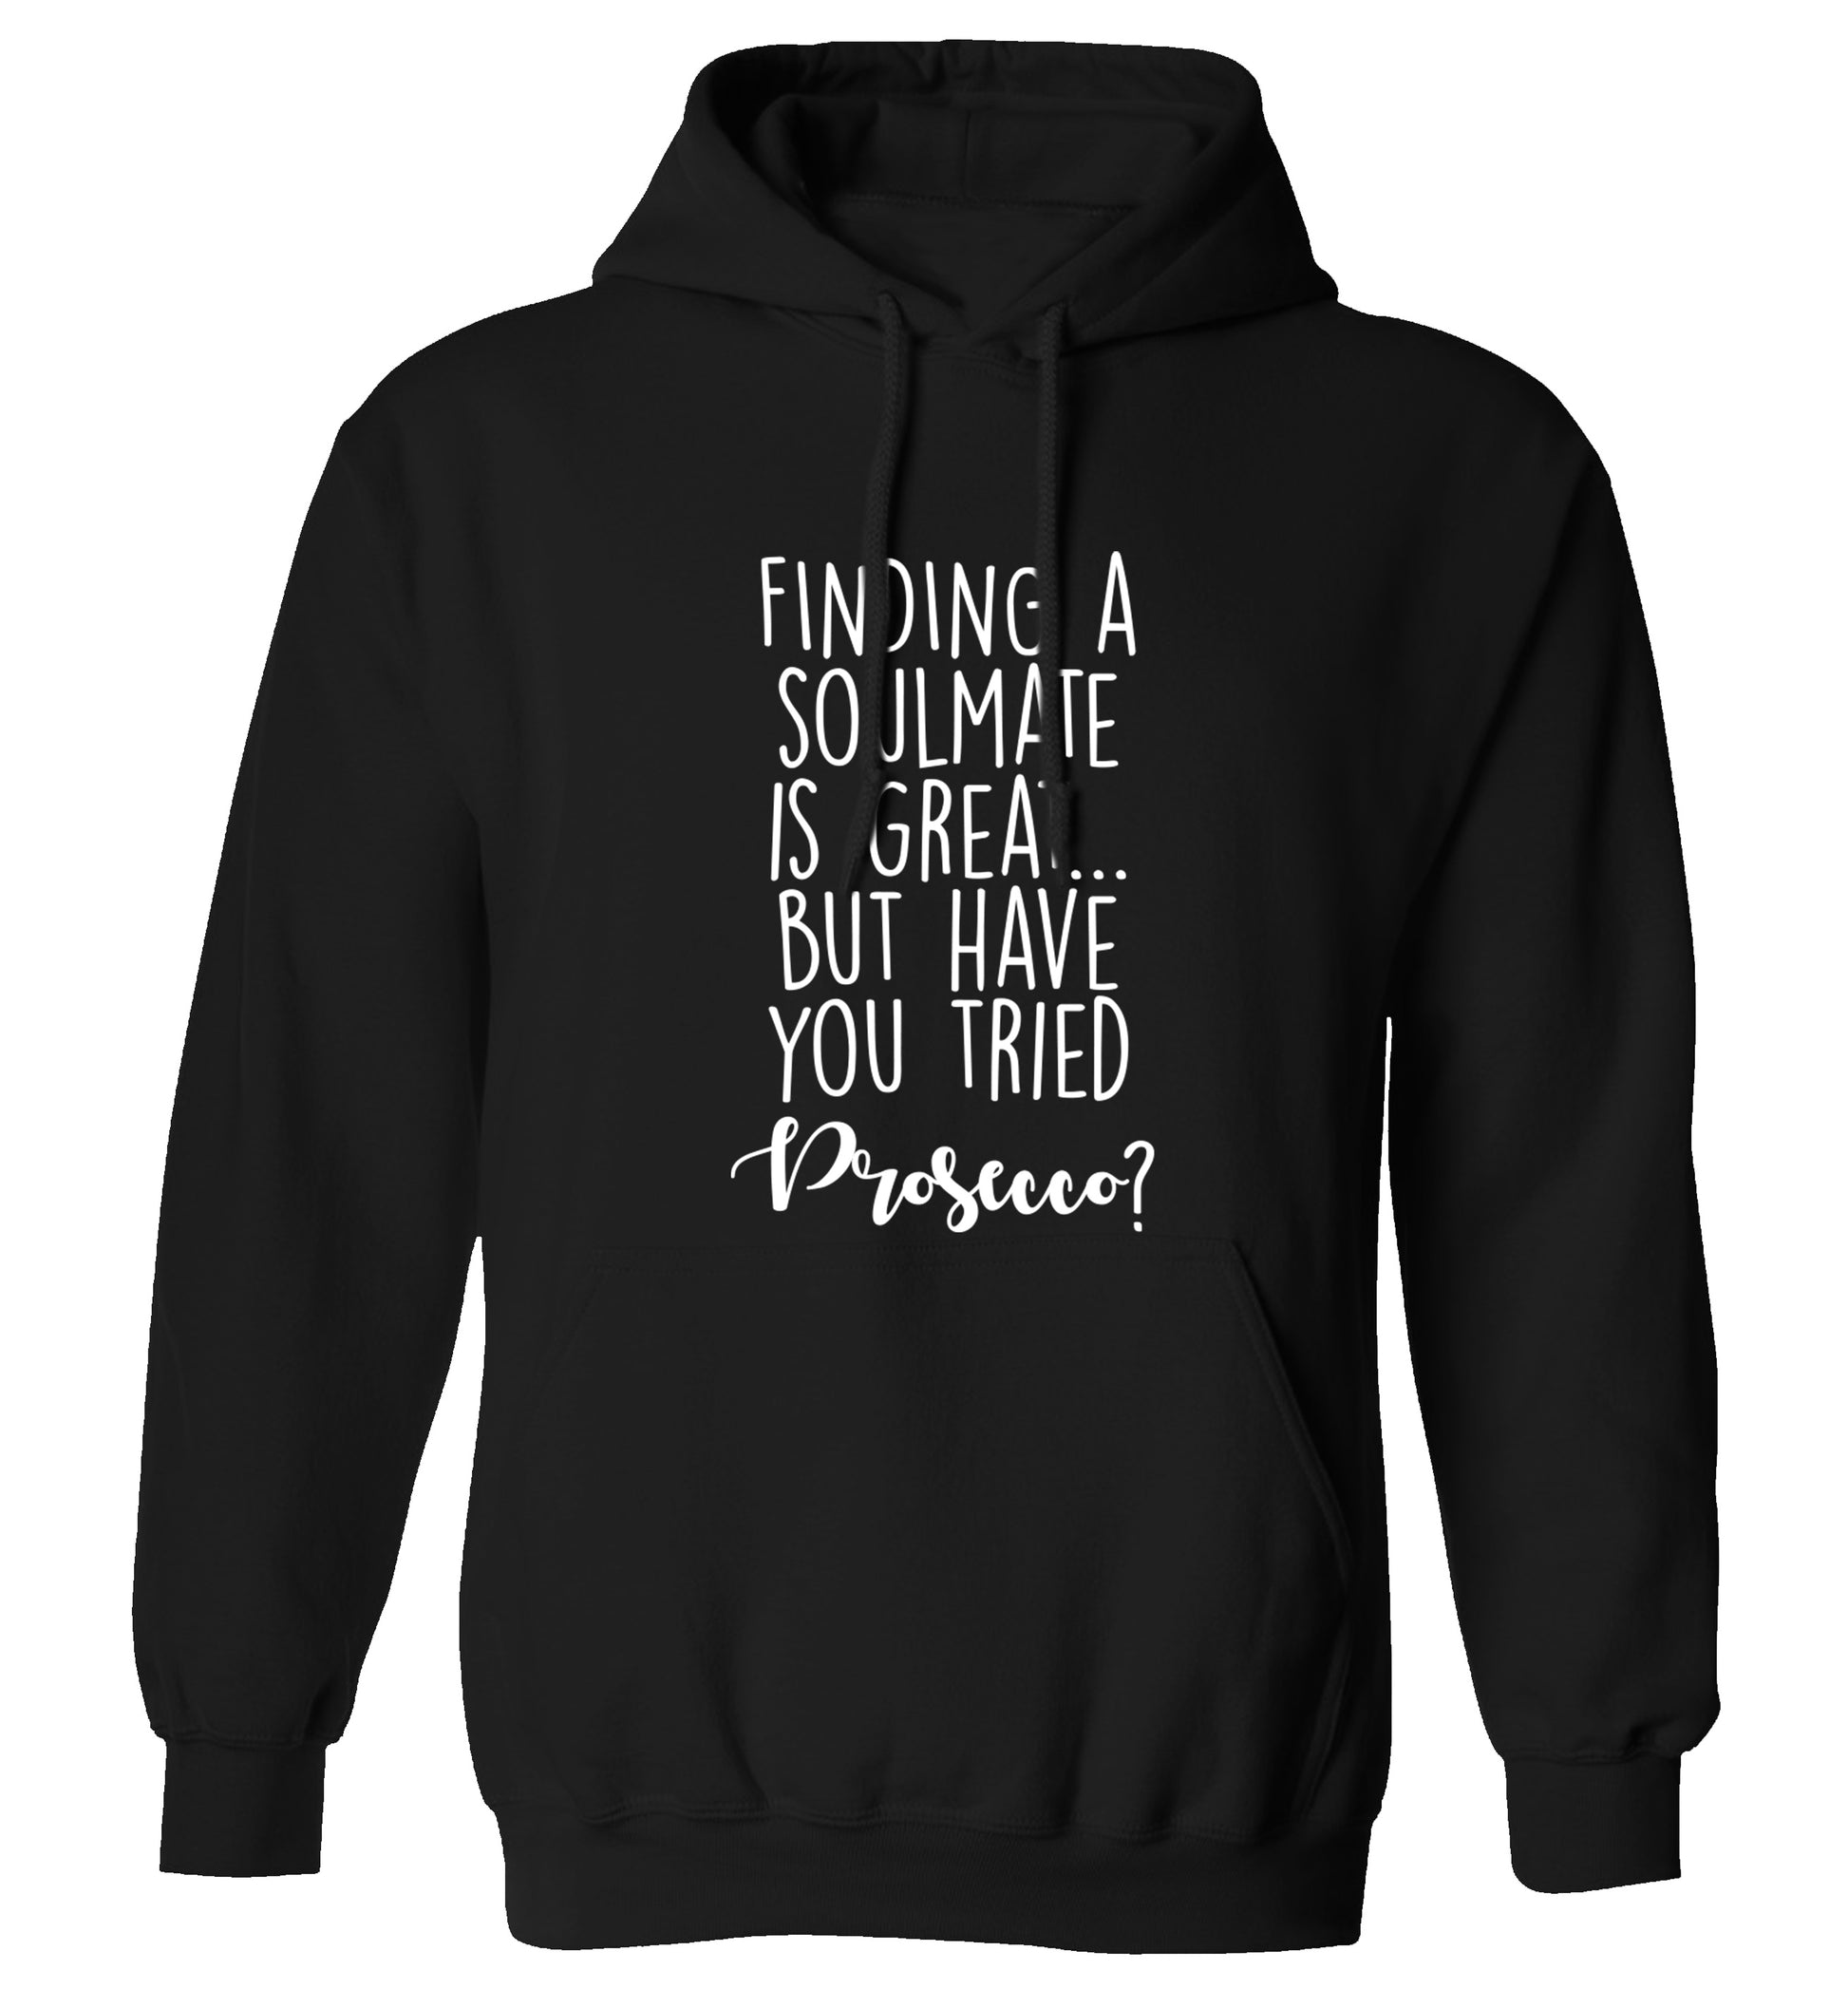 Finding a soulmate is great but have you tried prosecco? adults unisex black hoodie 2XL